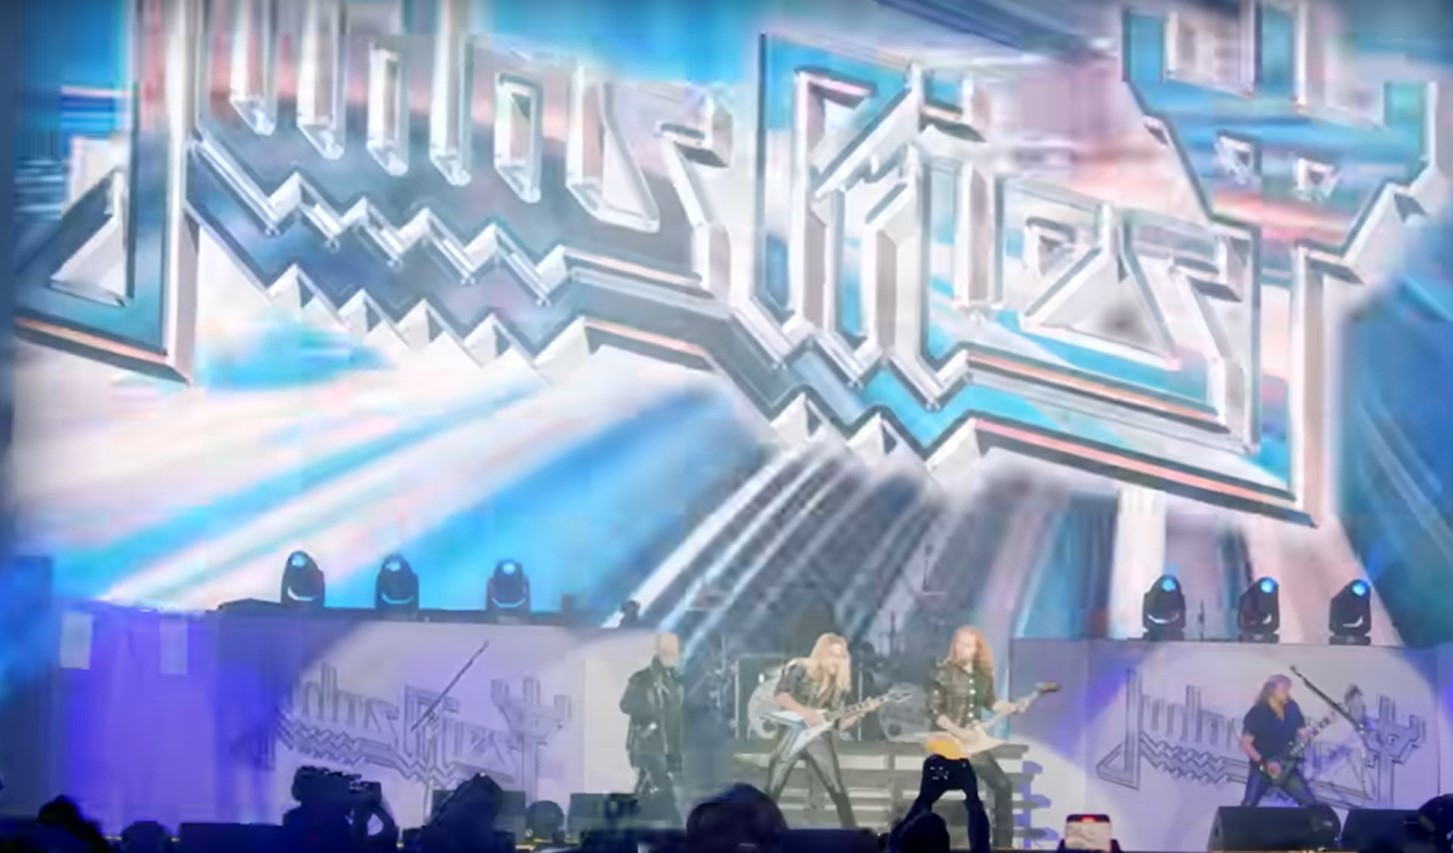 Watch Judas Priest's Official Video For "Panic Attack" From Upcoming New Album